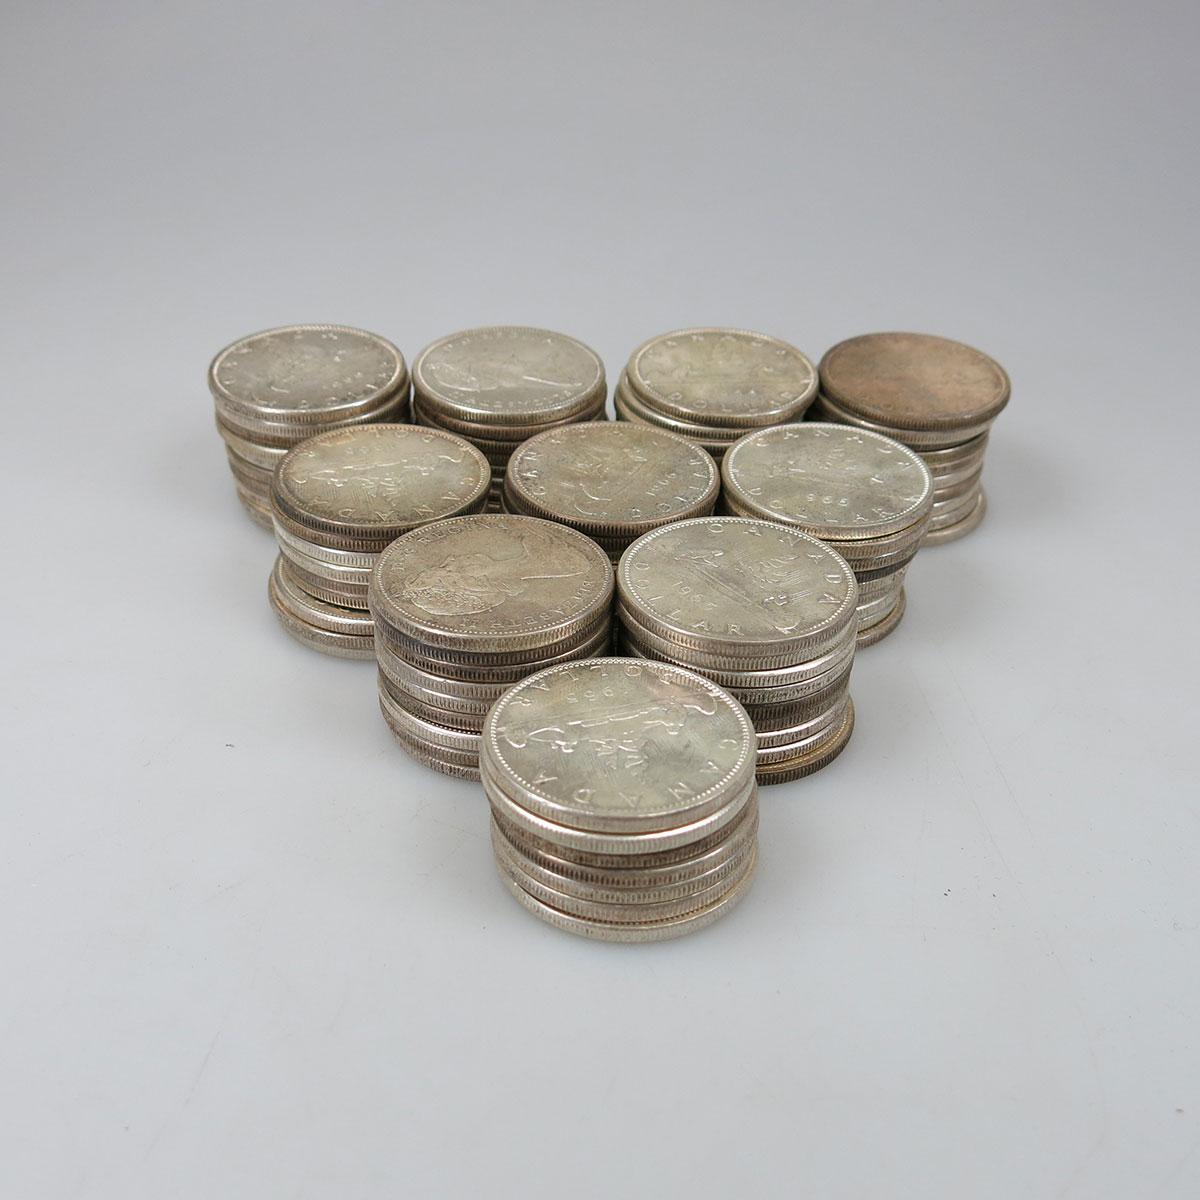 92 Canadian Silver Dollars